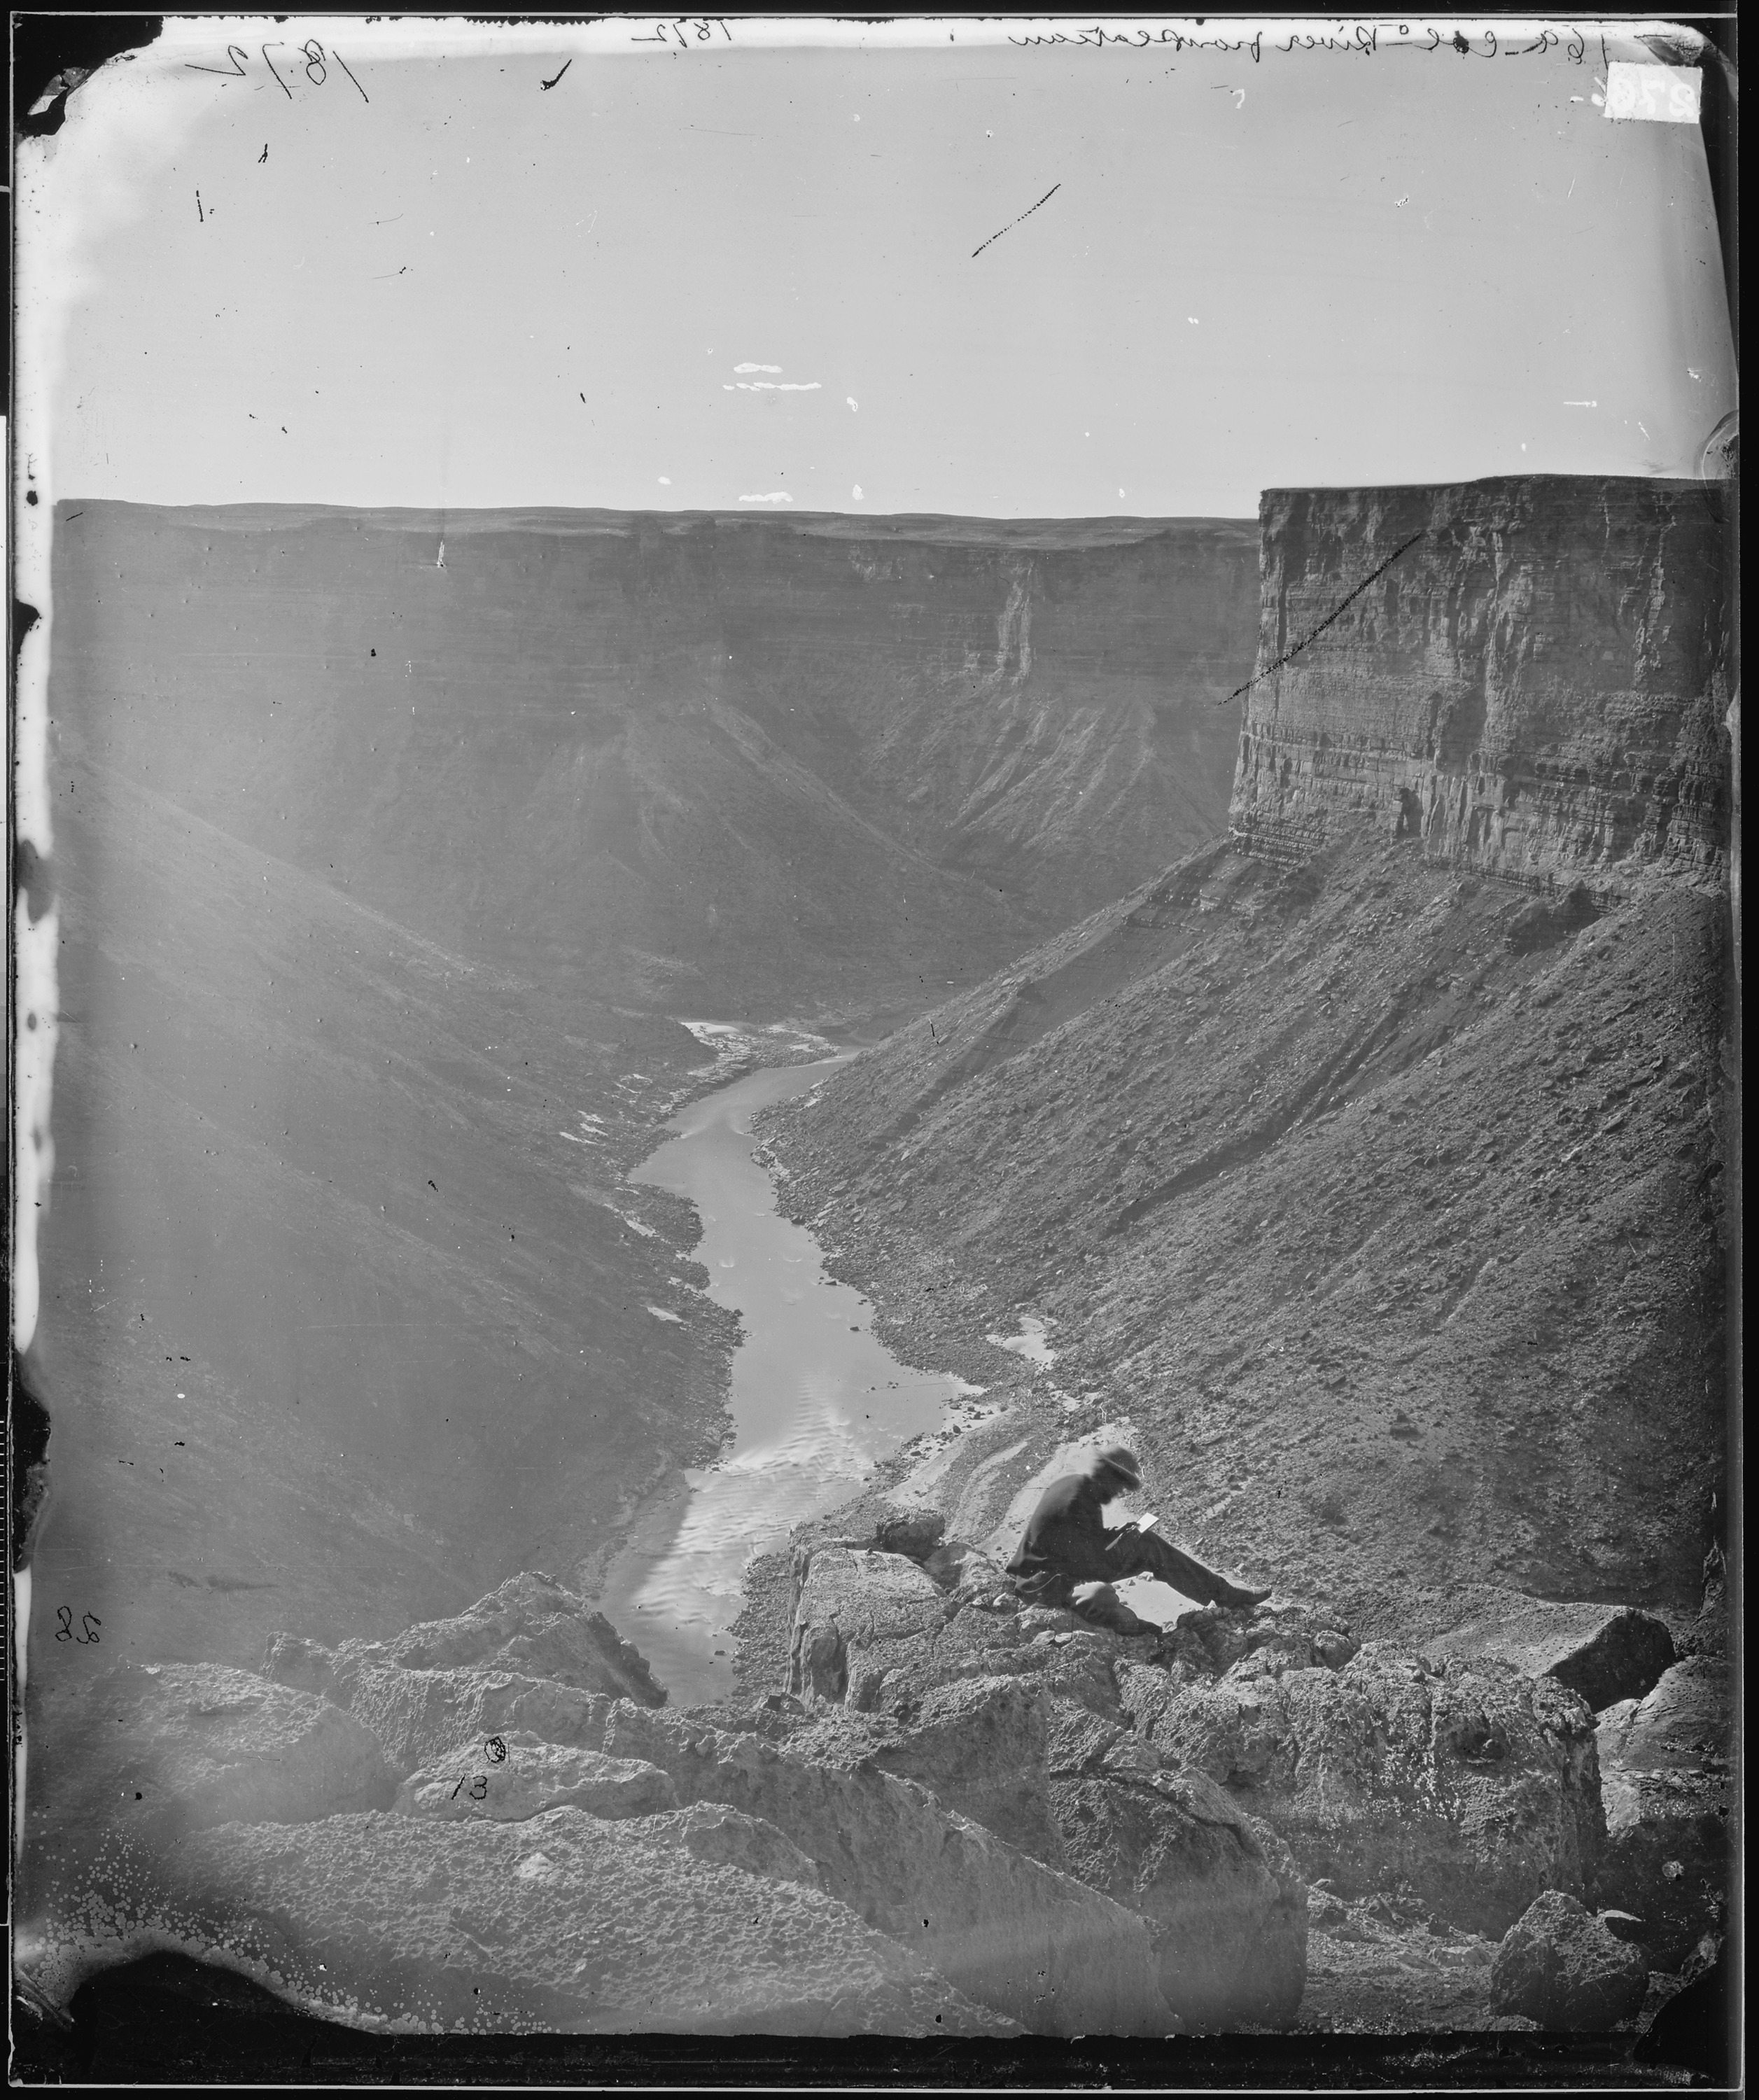 Grand Canyon as photographed by William Bell in 1872 as part of the Wheeler expedition